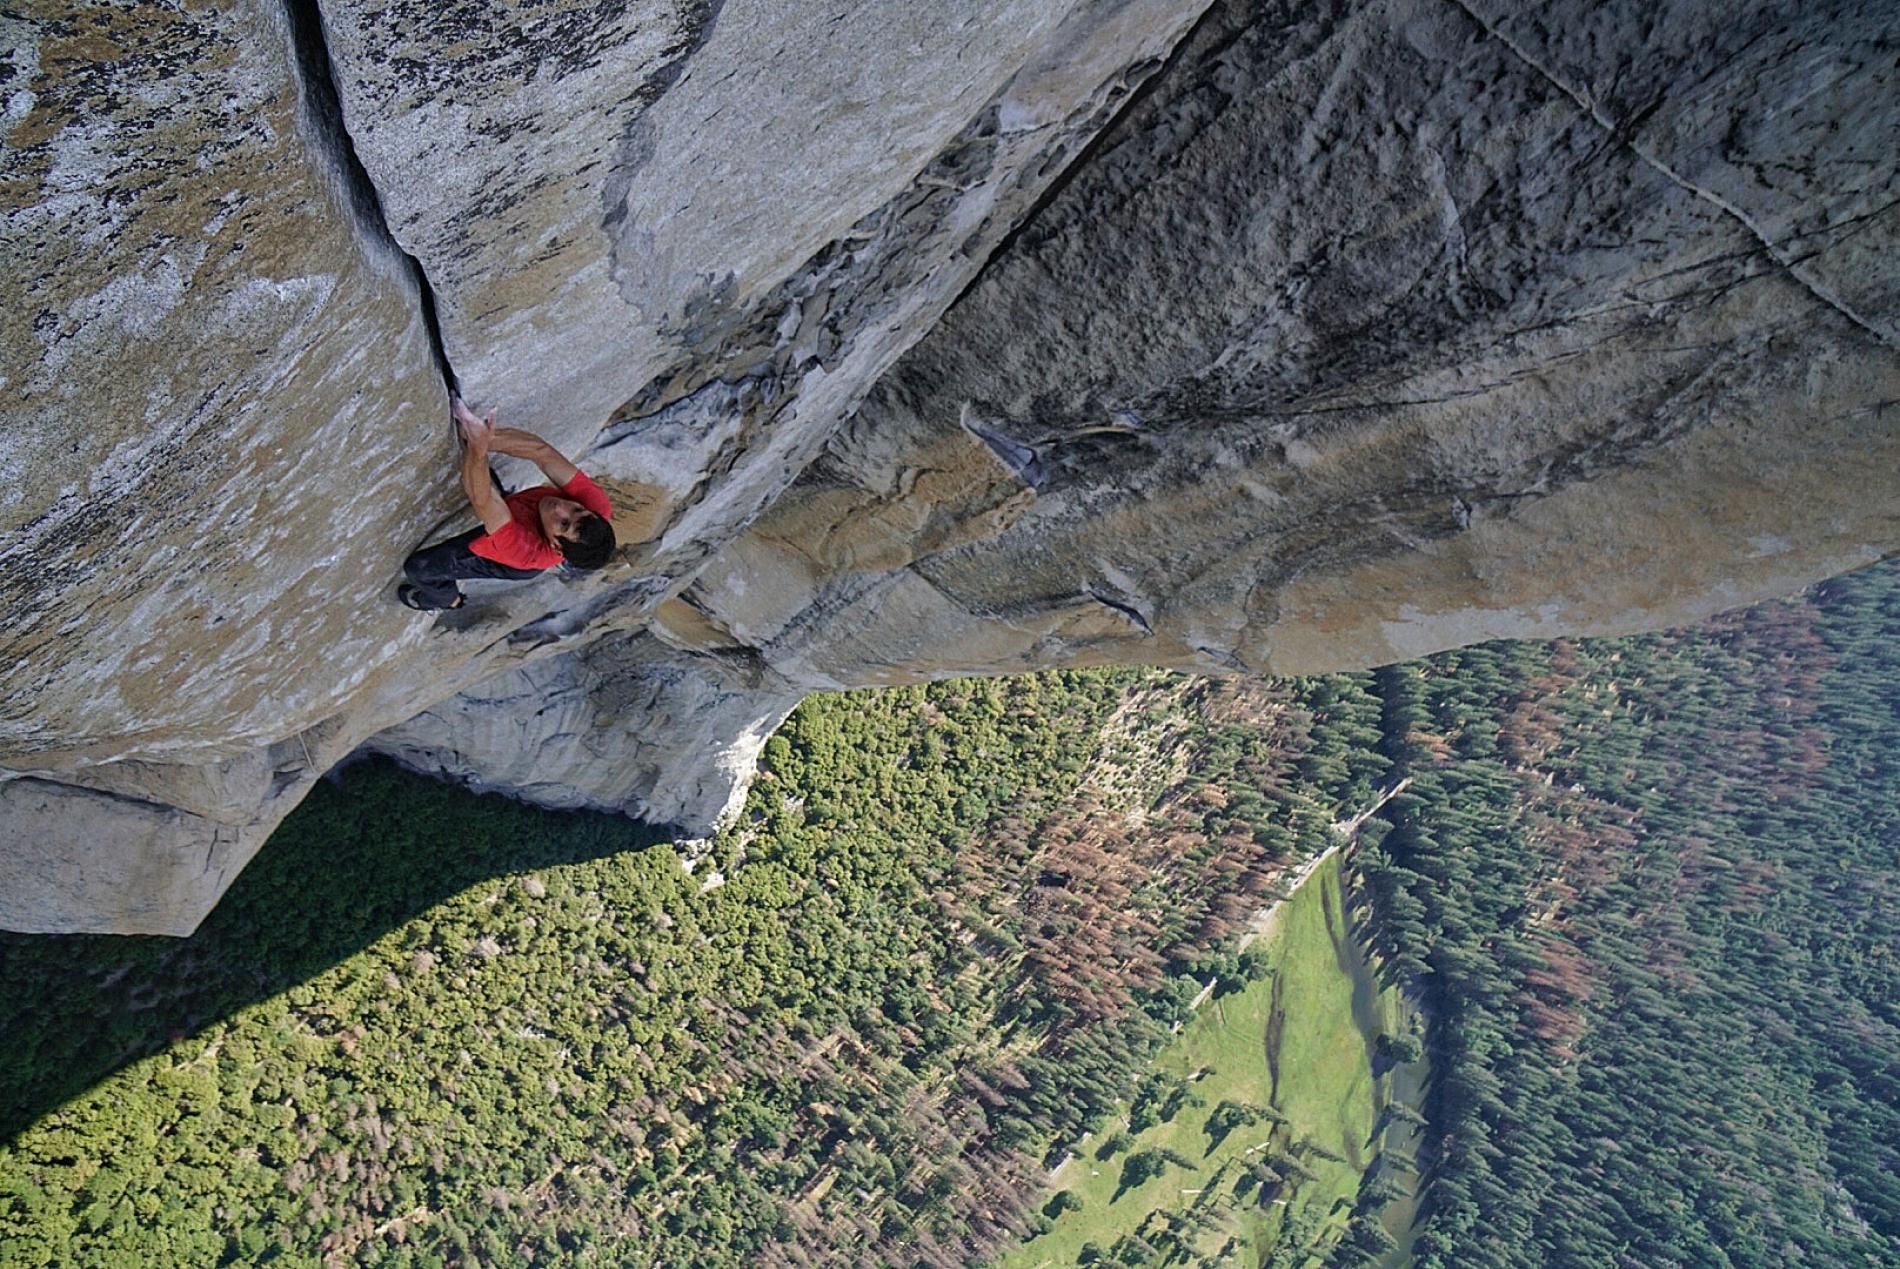 First interview with free solo climber, Alex Honnold, who scaled El Capitan without a rope